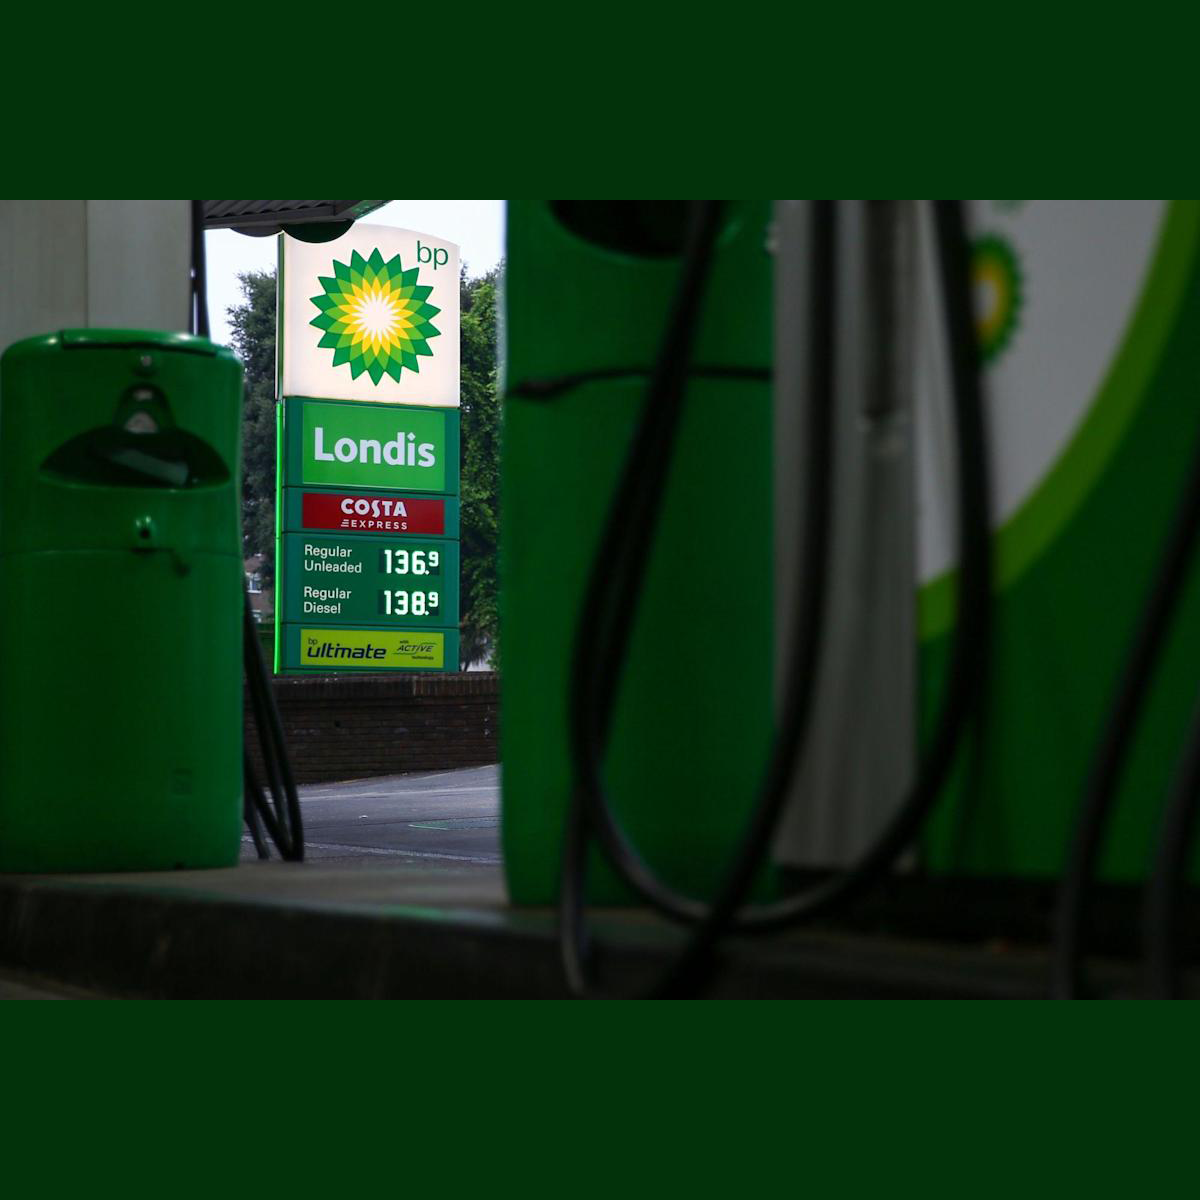 BP Increase Buyback as Profit Rises on Higher Prices